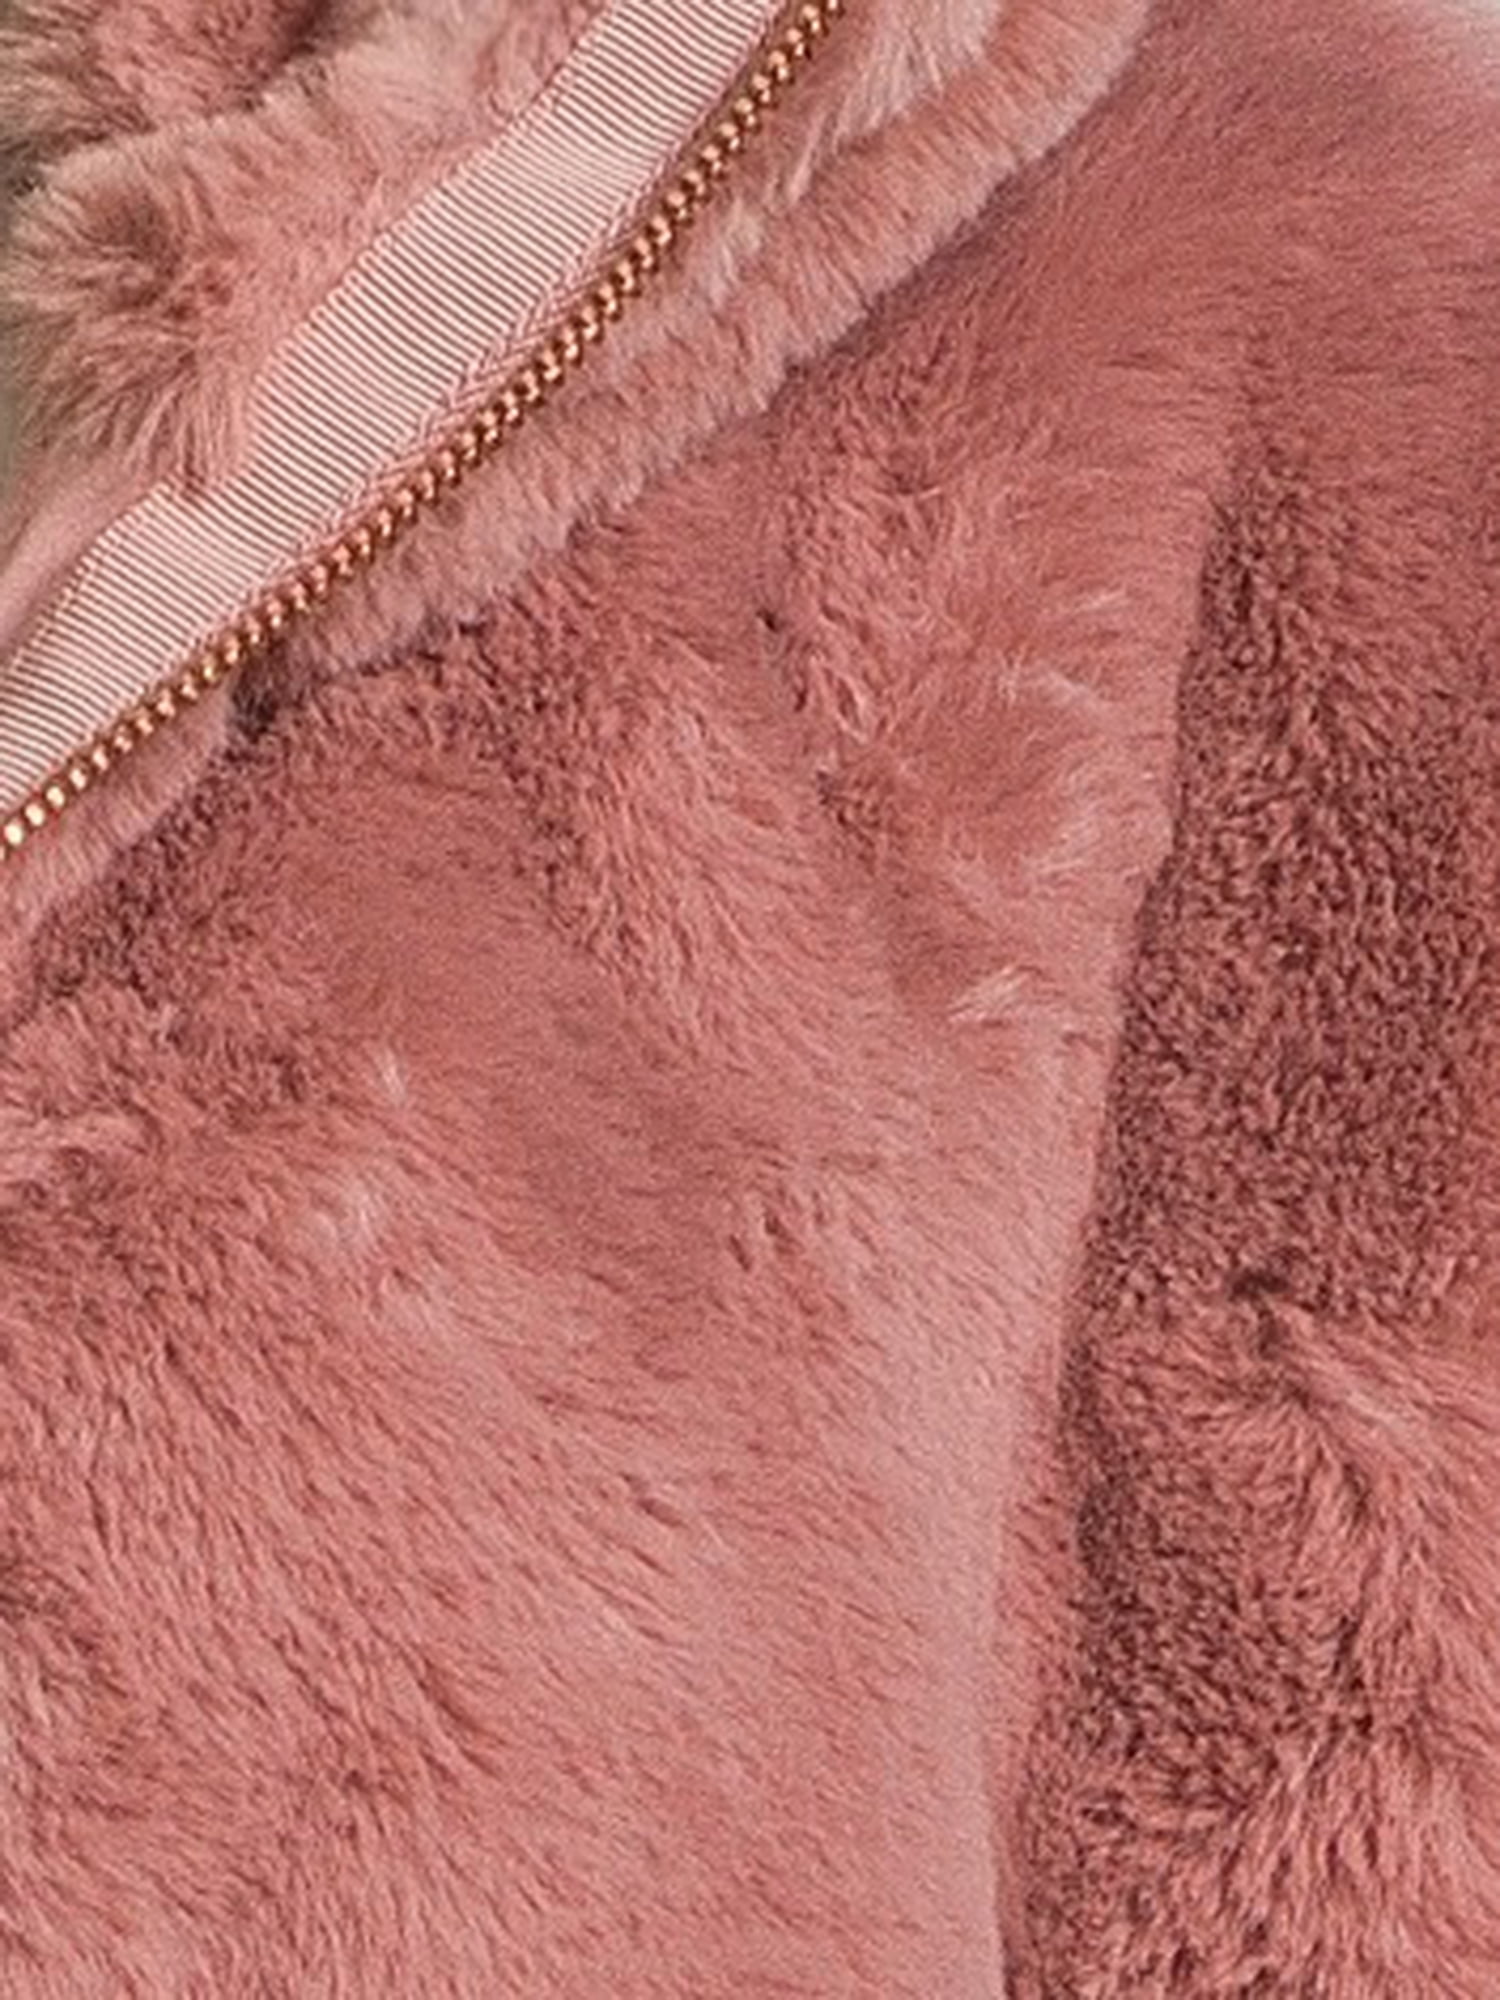 Lucky Brand rose gold faux fur missy jacket Size Large - Coats